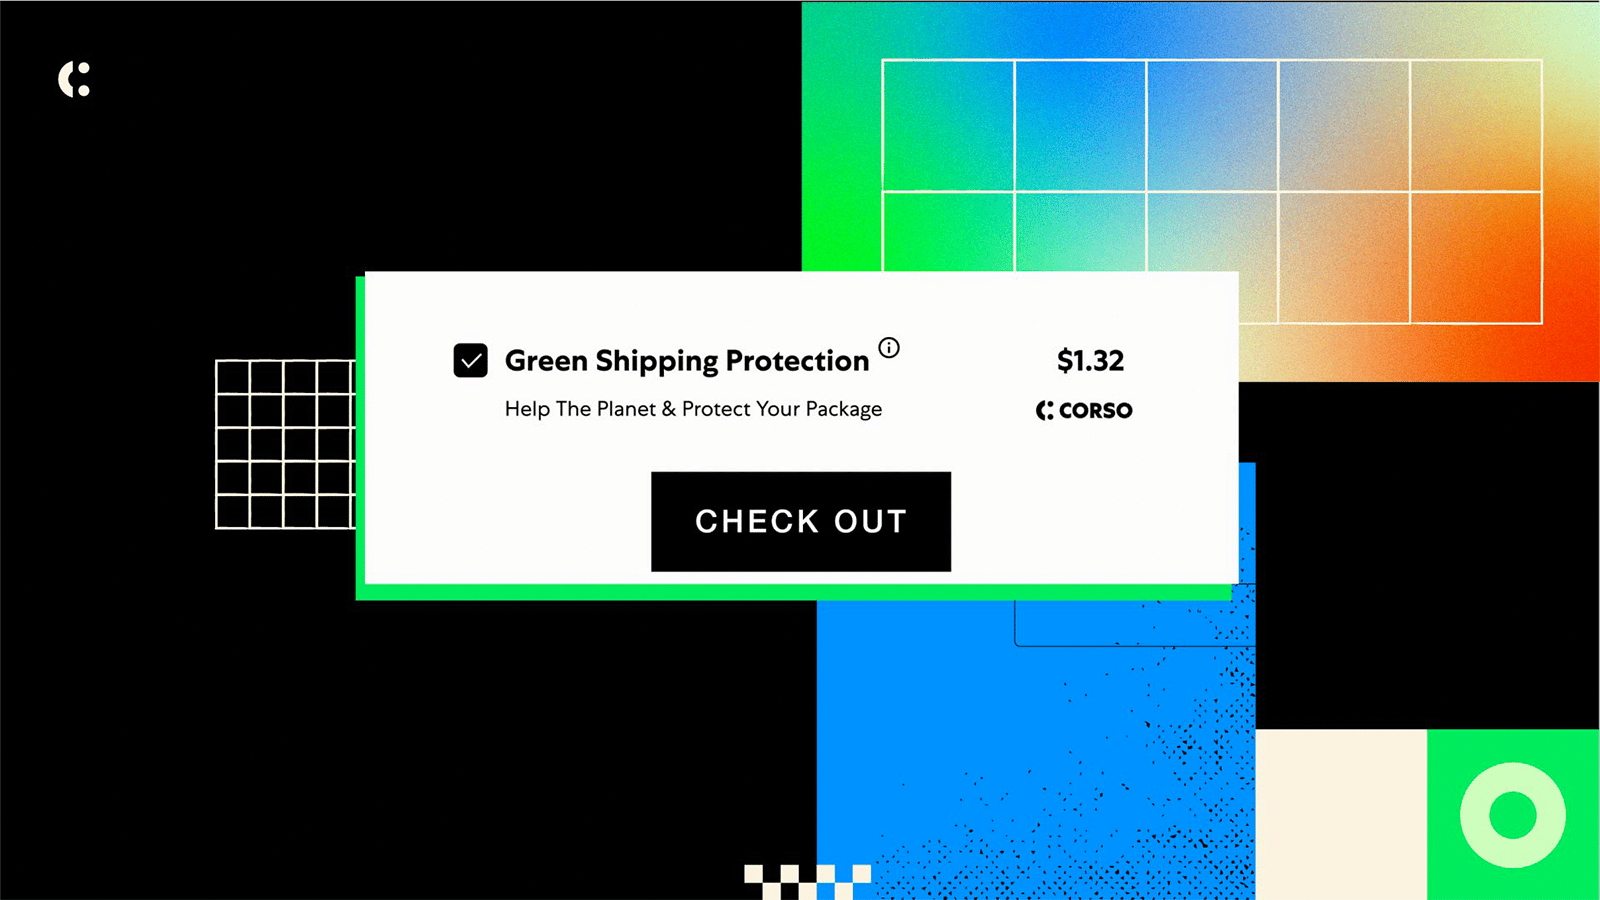 Green Shipping Protection